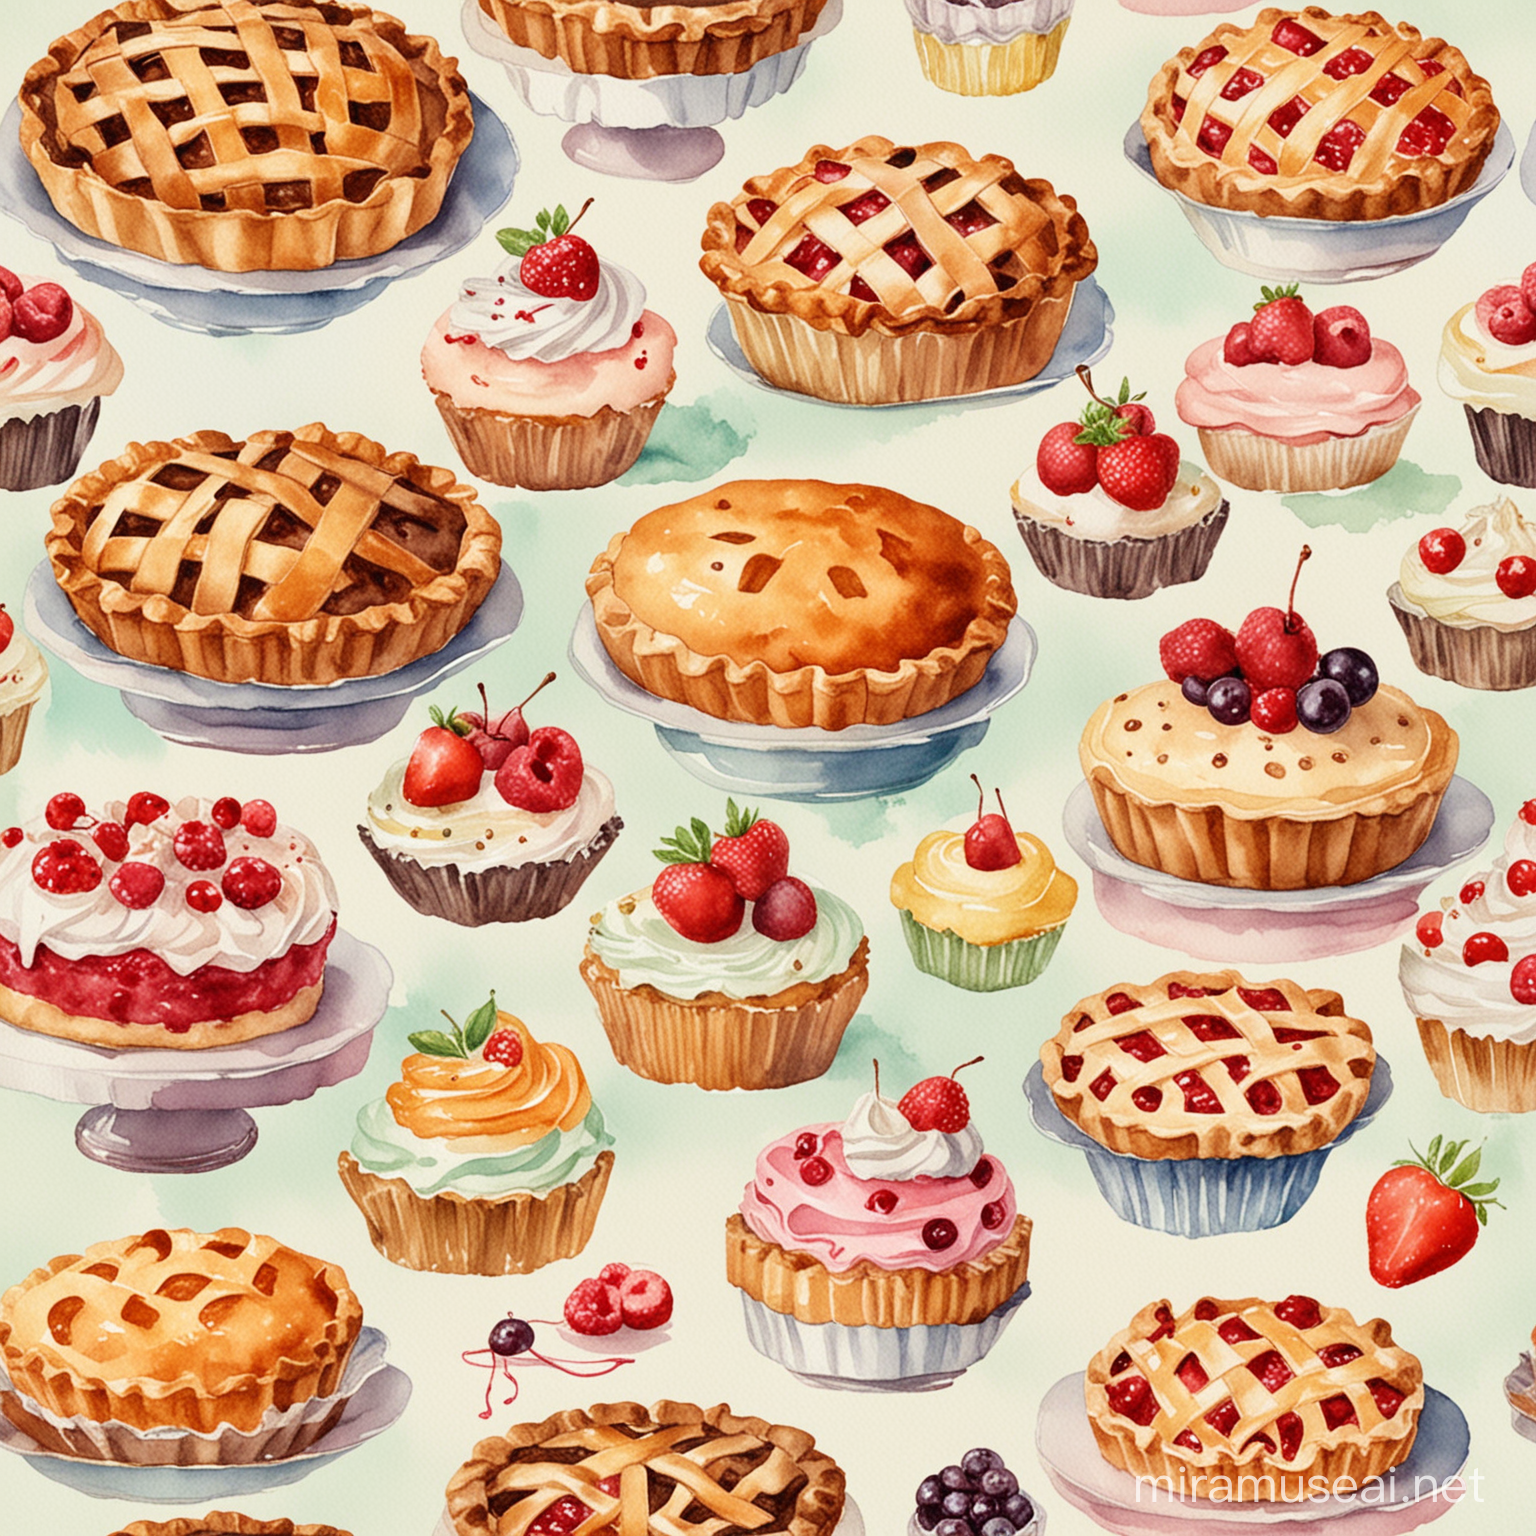 vintage pies and cakes watercolor images